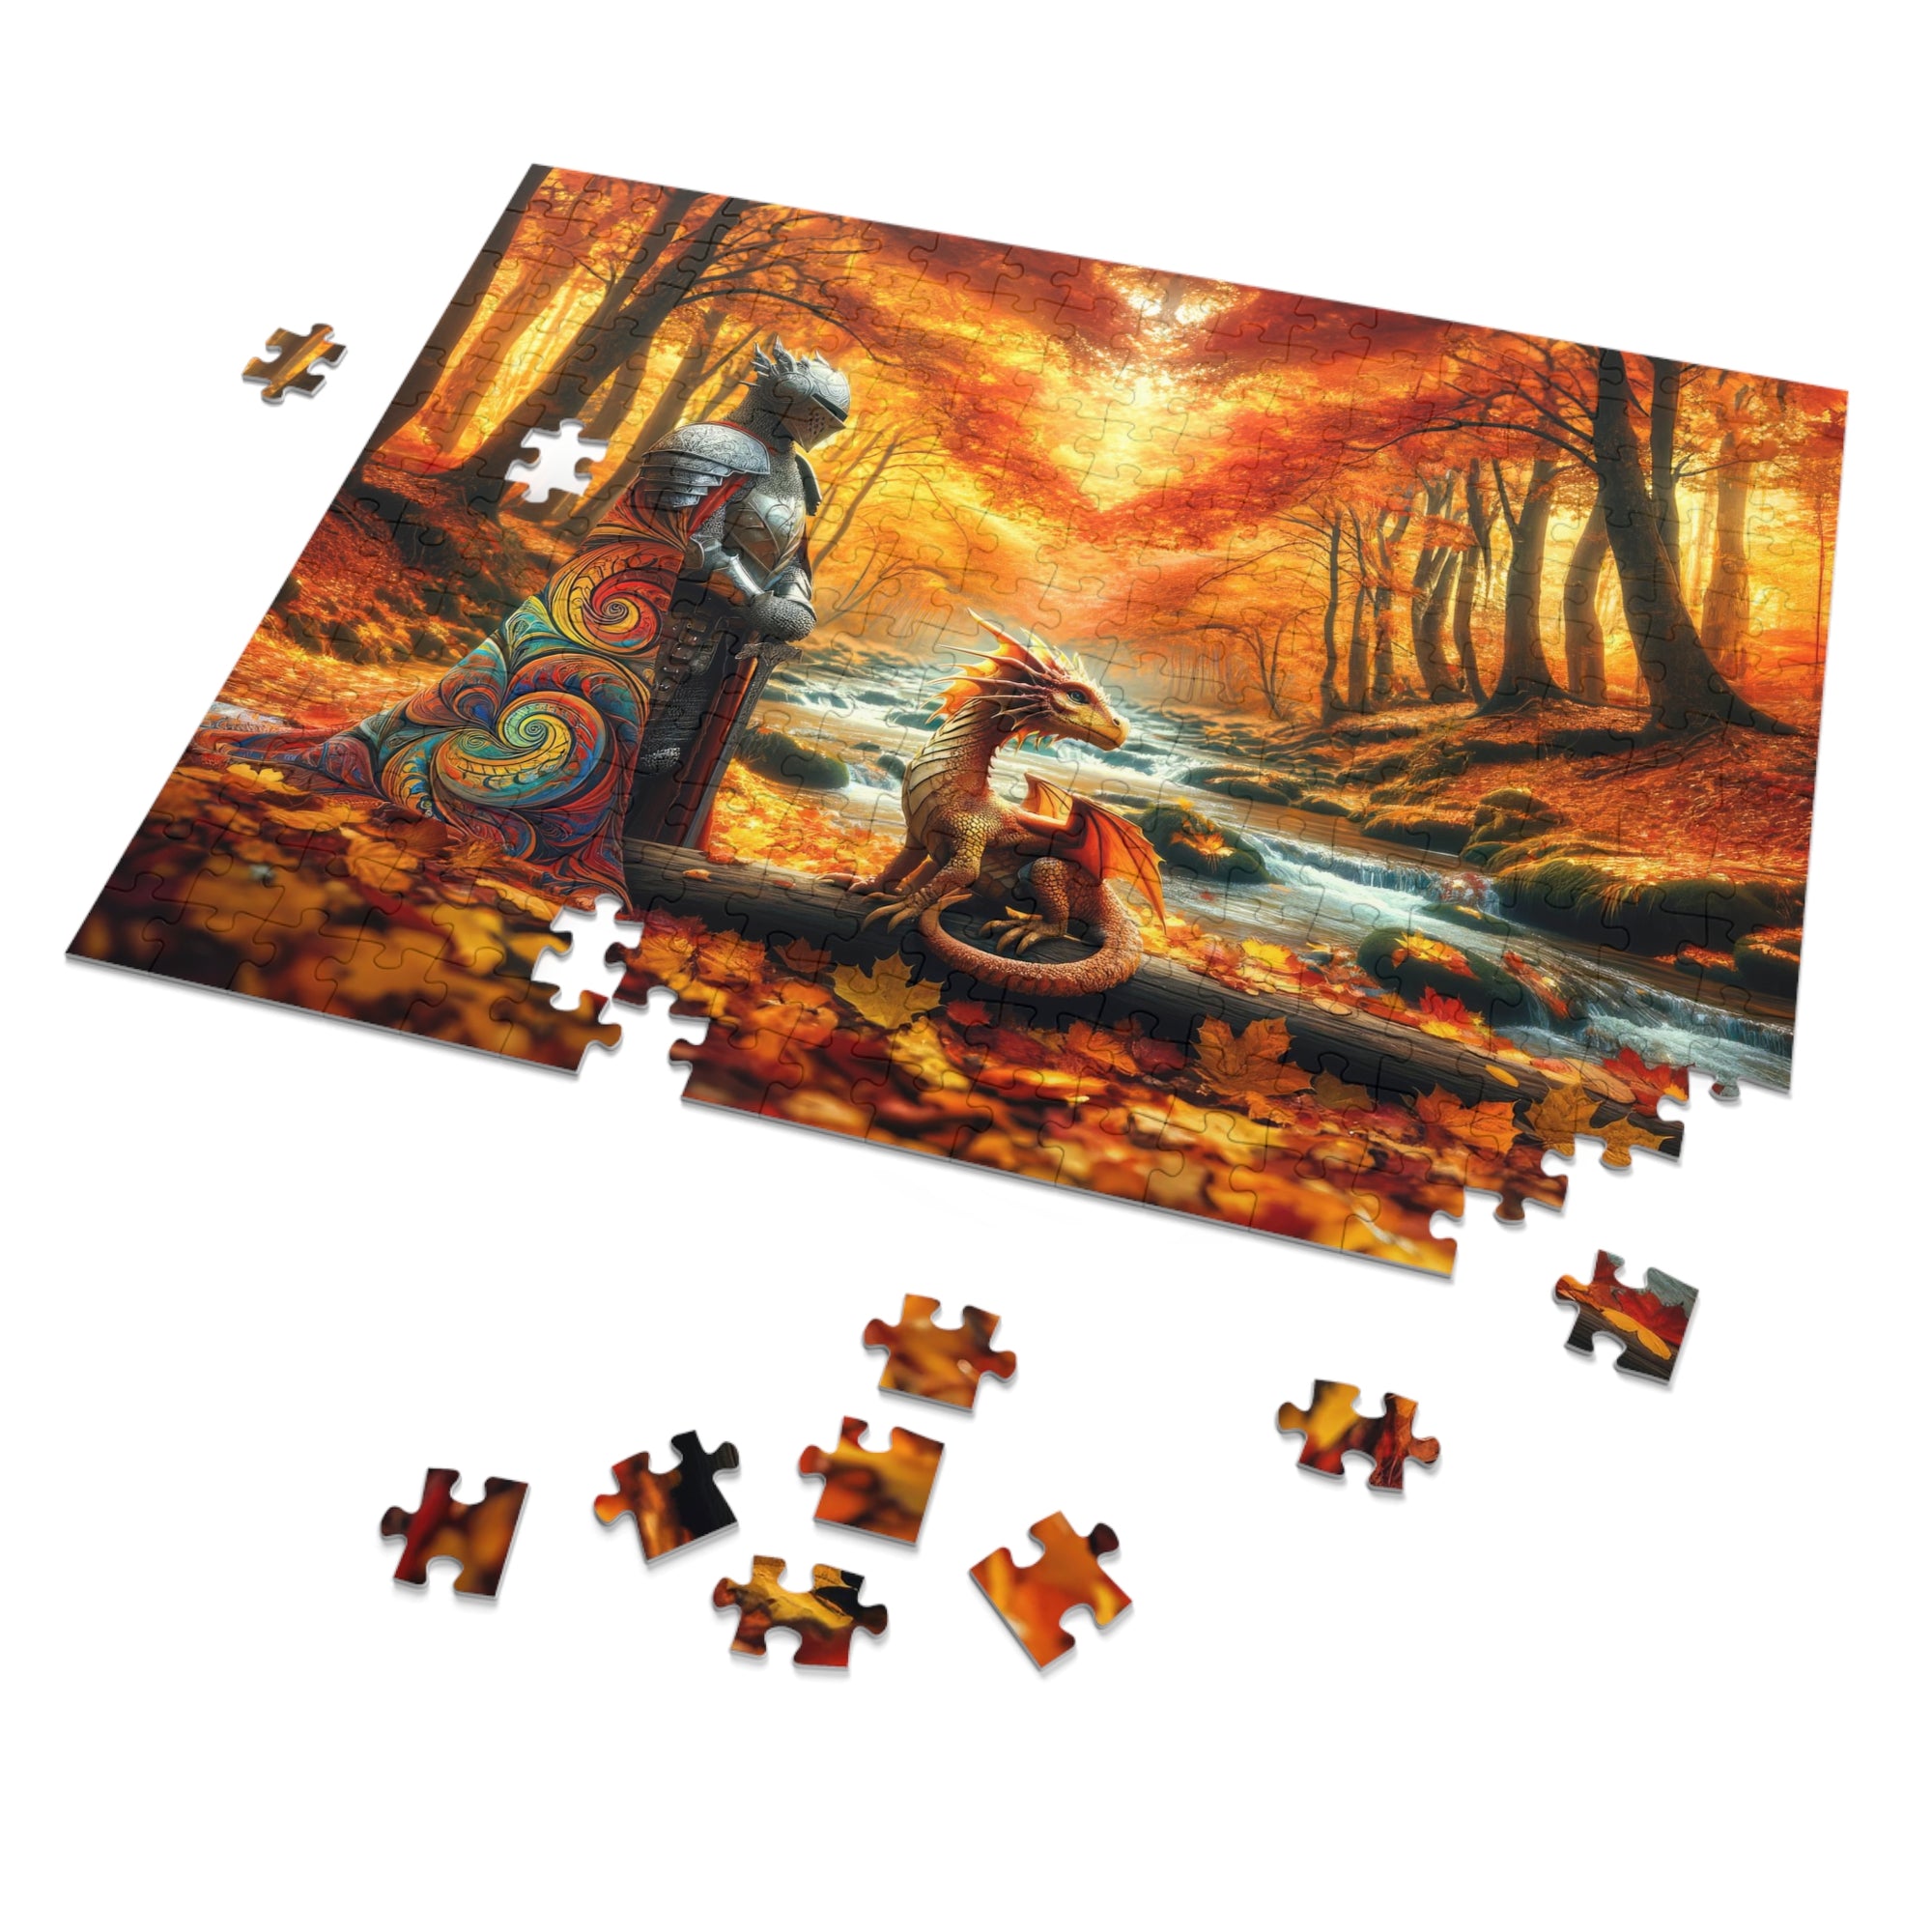 The Guardian's Respite Jigsaw Puzzle